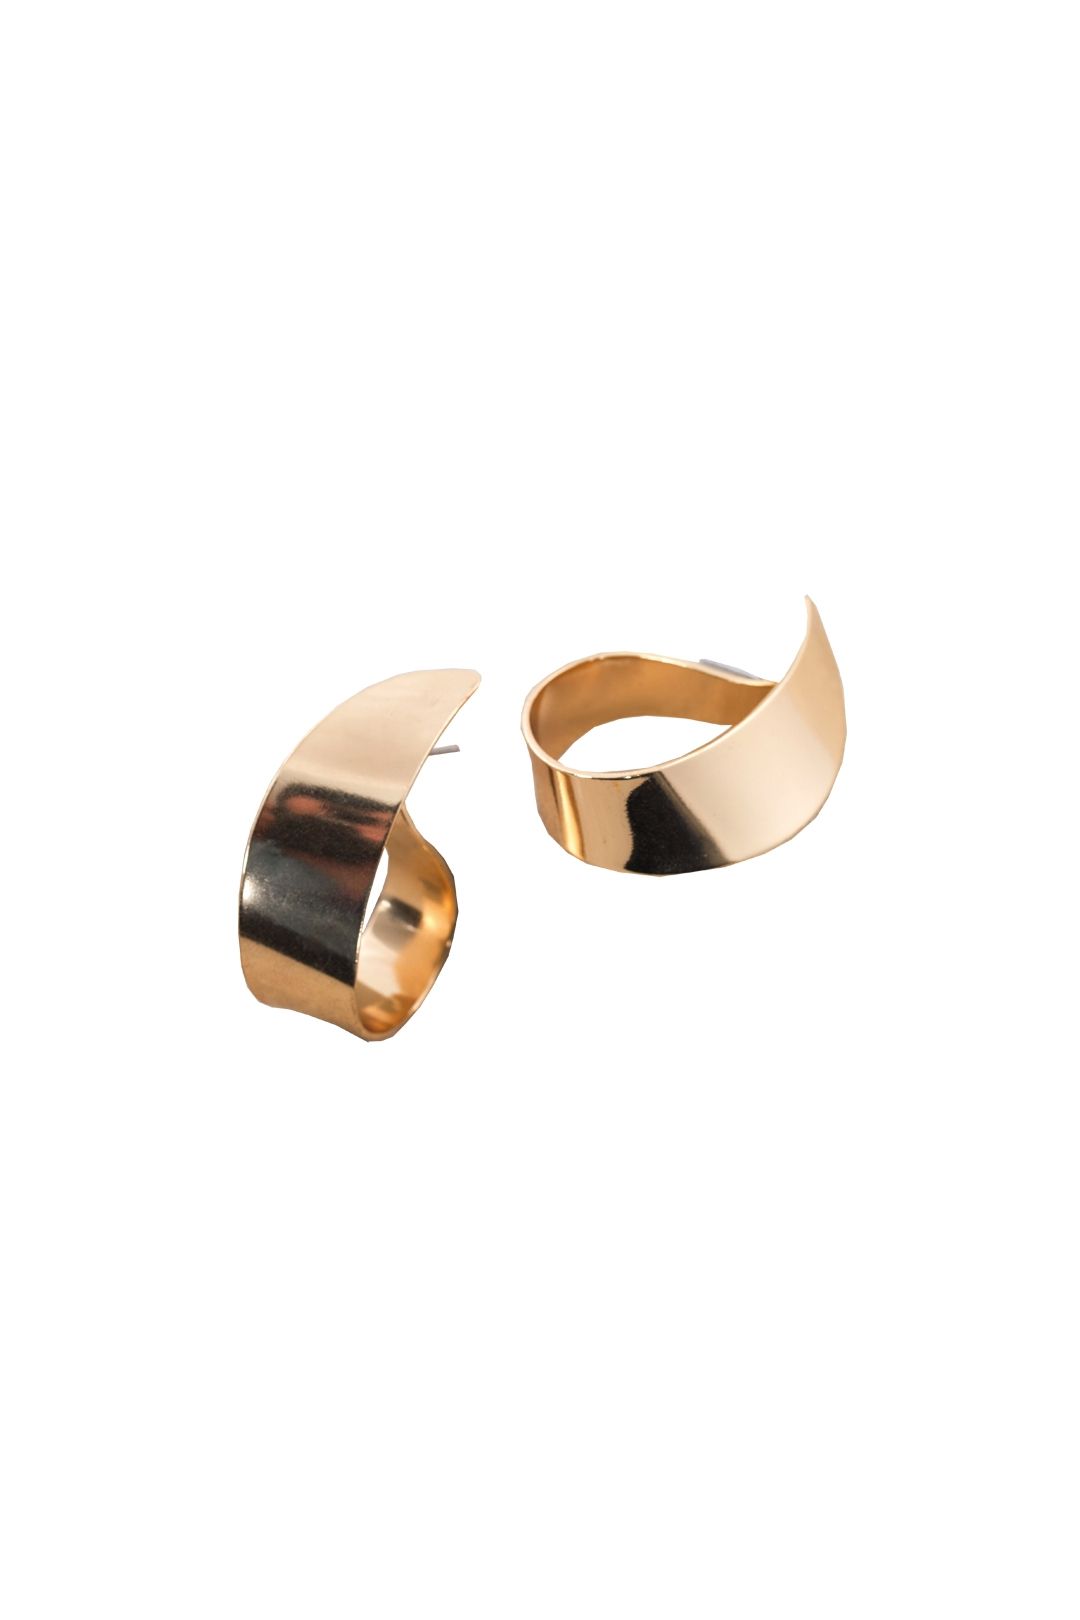 Adorne - Curl Stud Earrings - Gold - Front